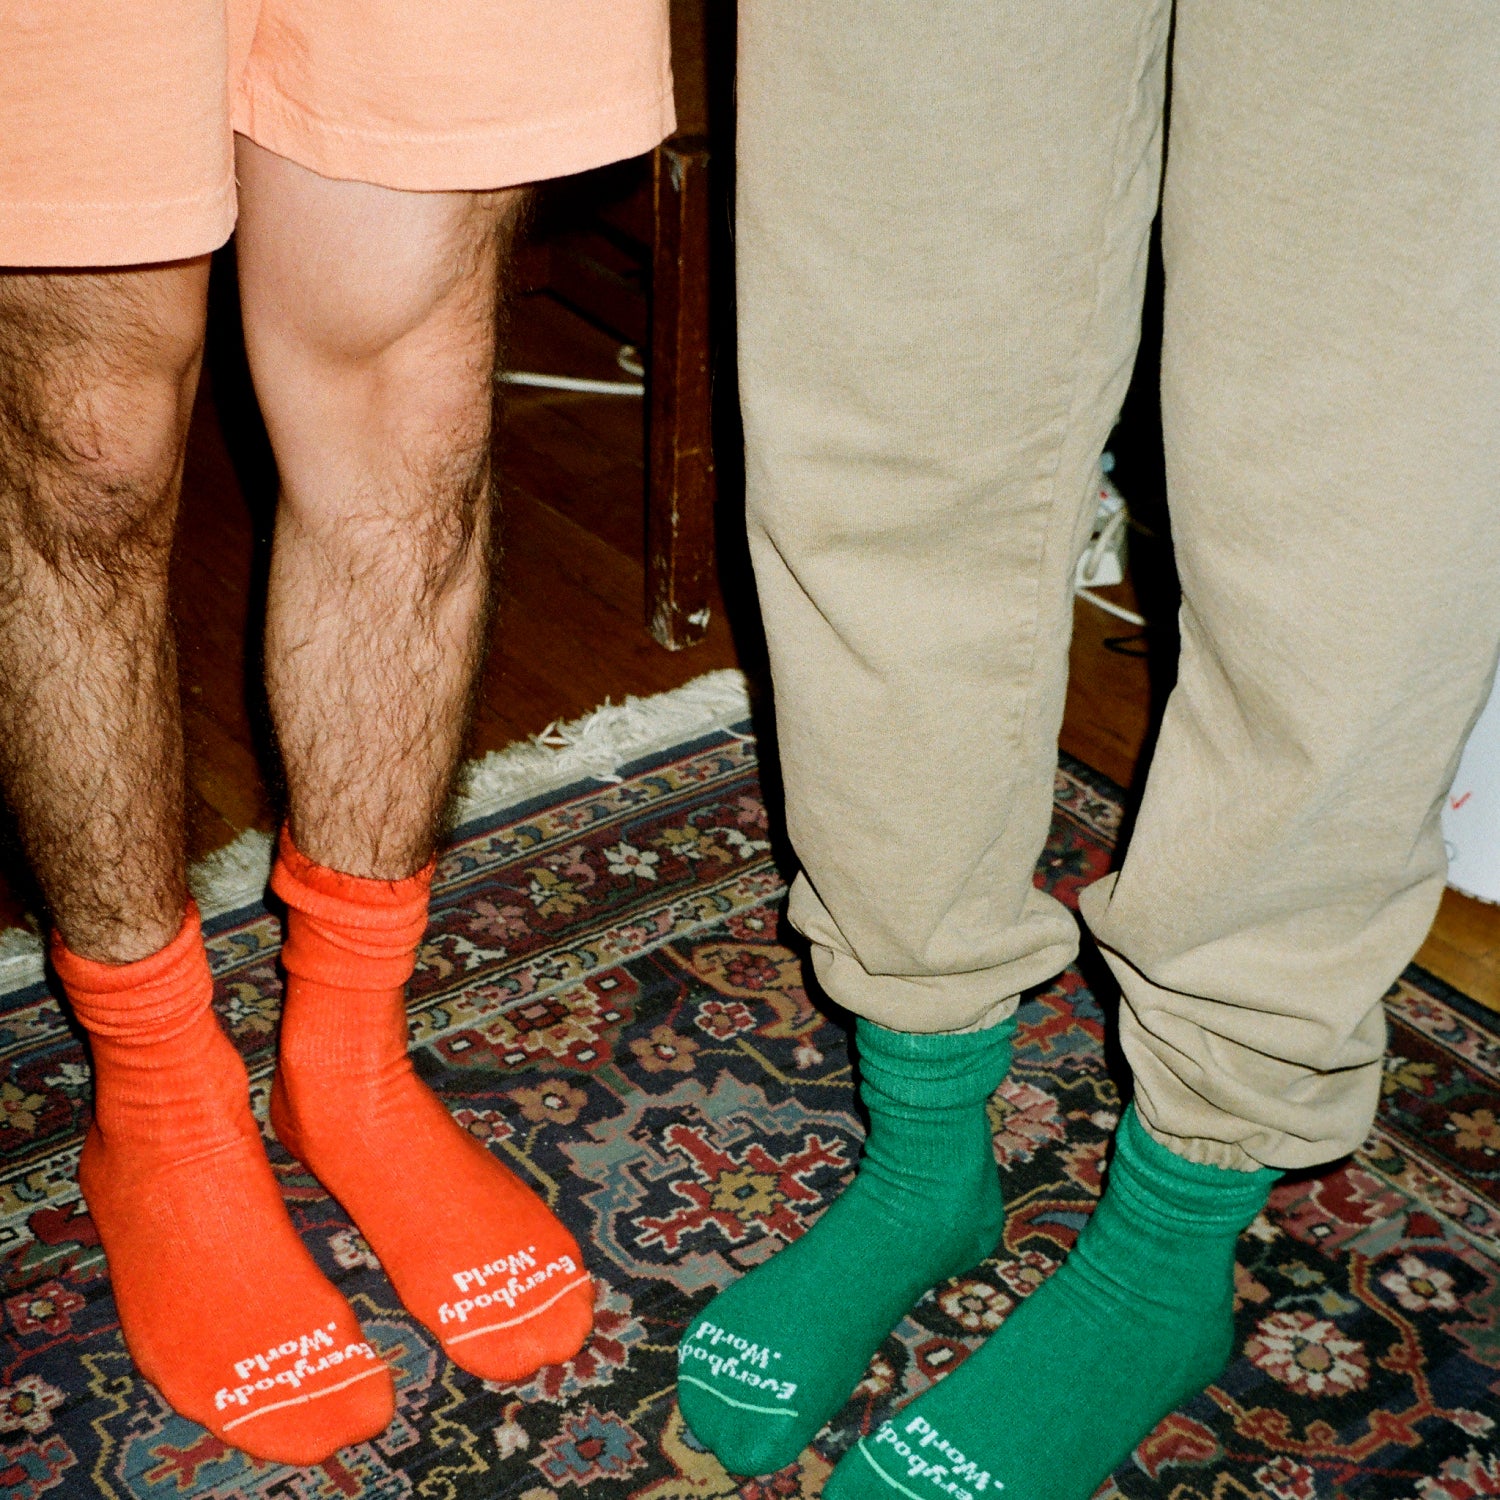 Two models at home in New York wearing Squishy Socks and standing on a rug